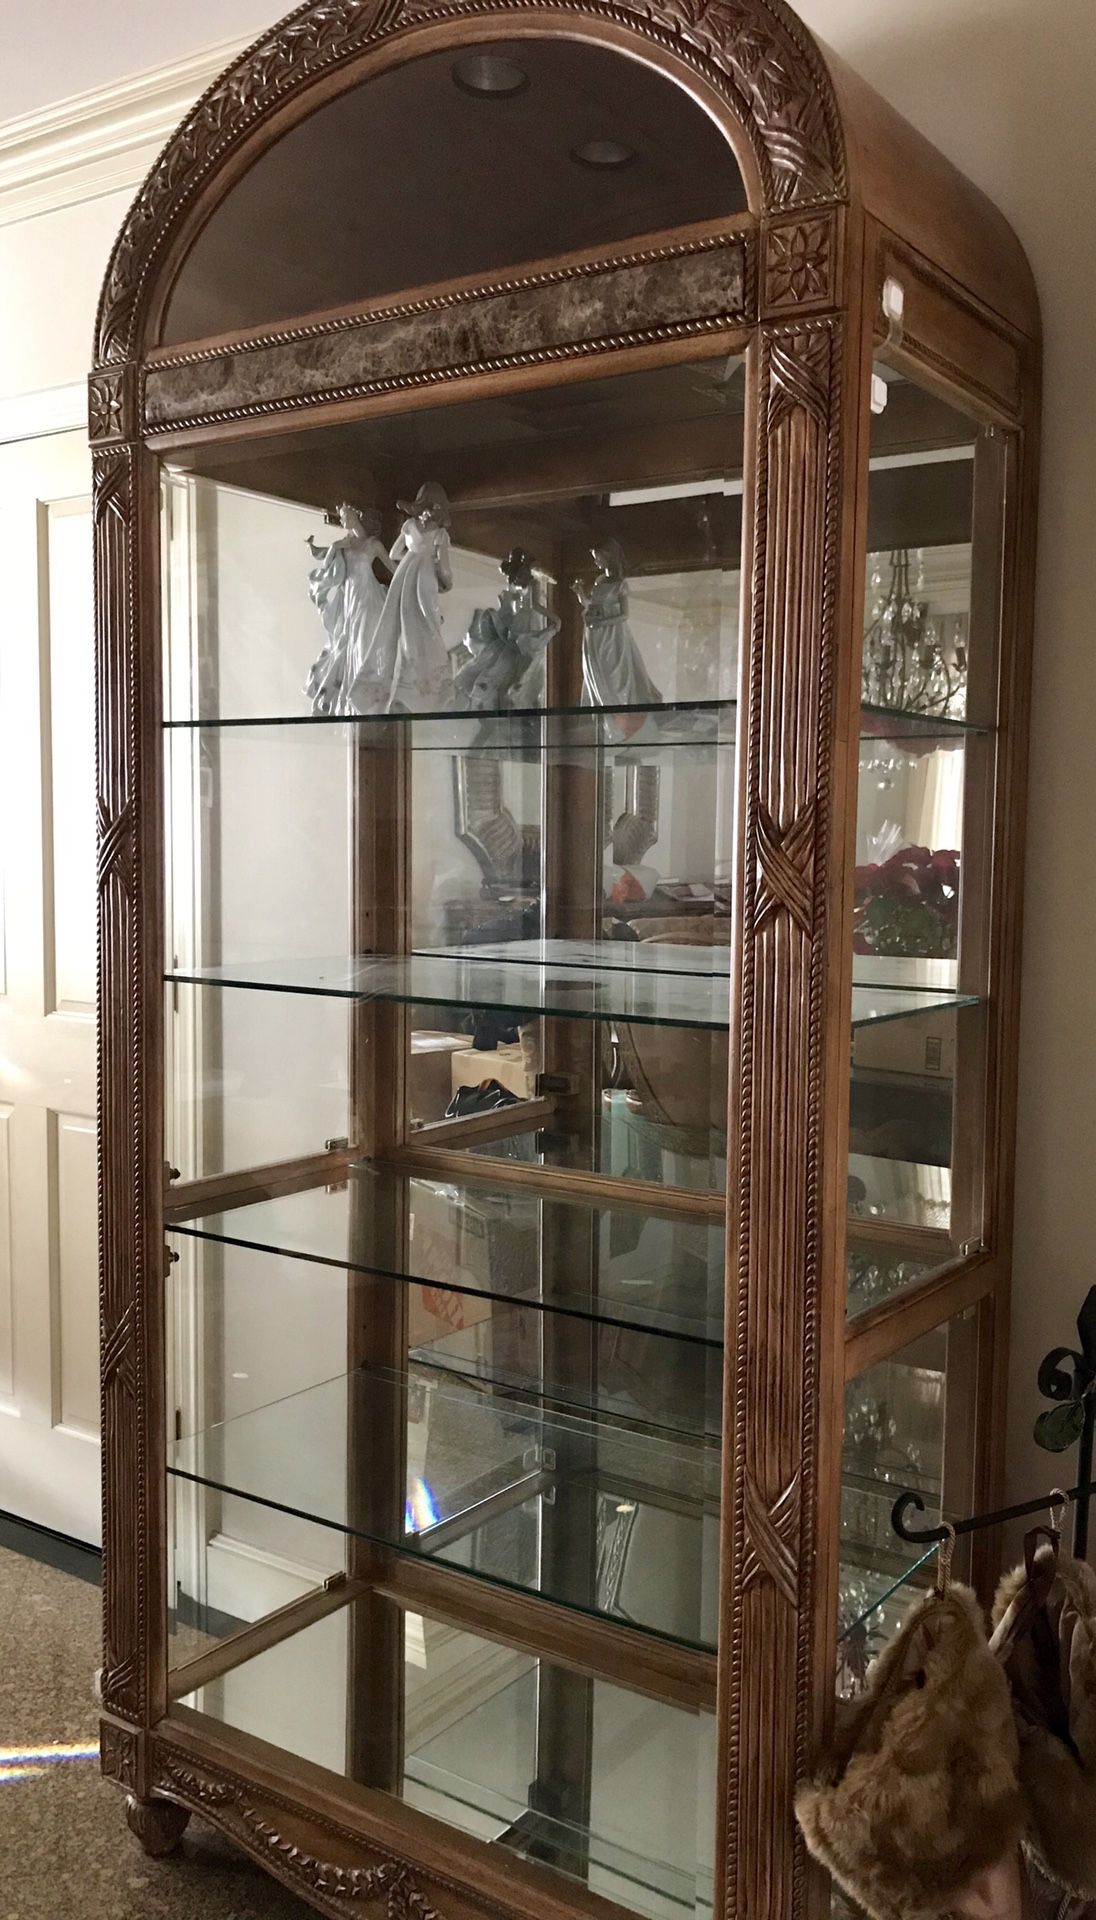 China cabinet by Schnadig